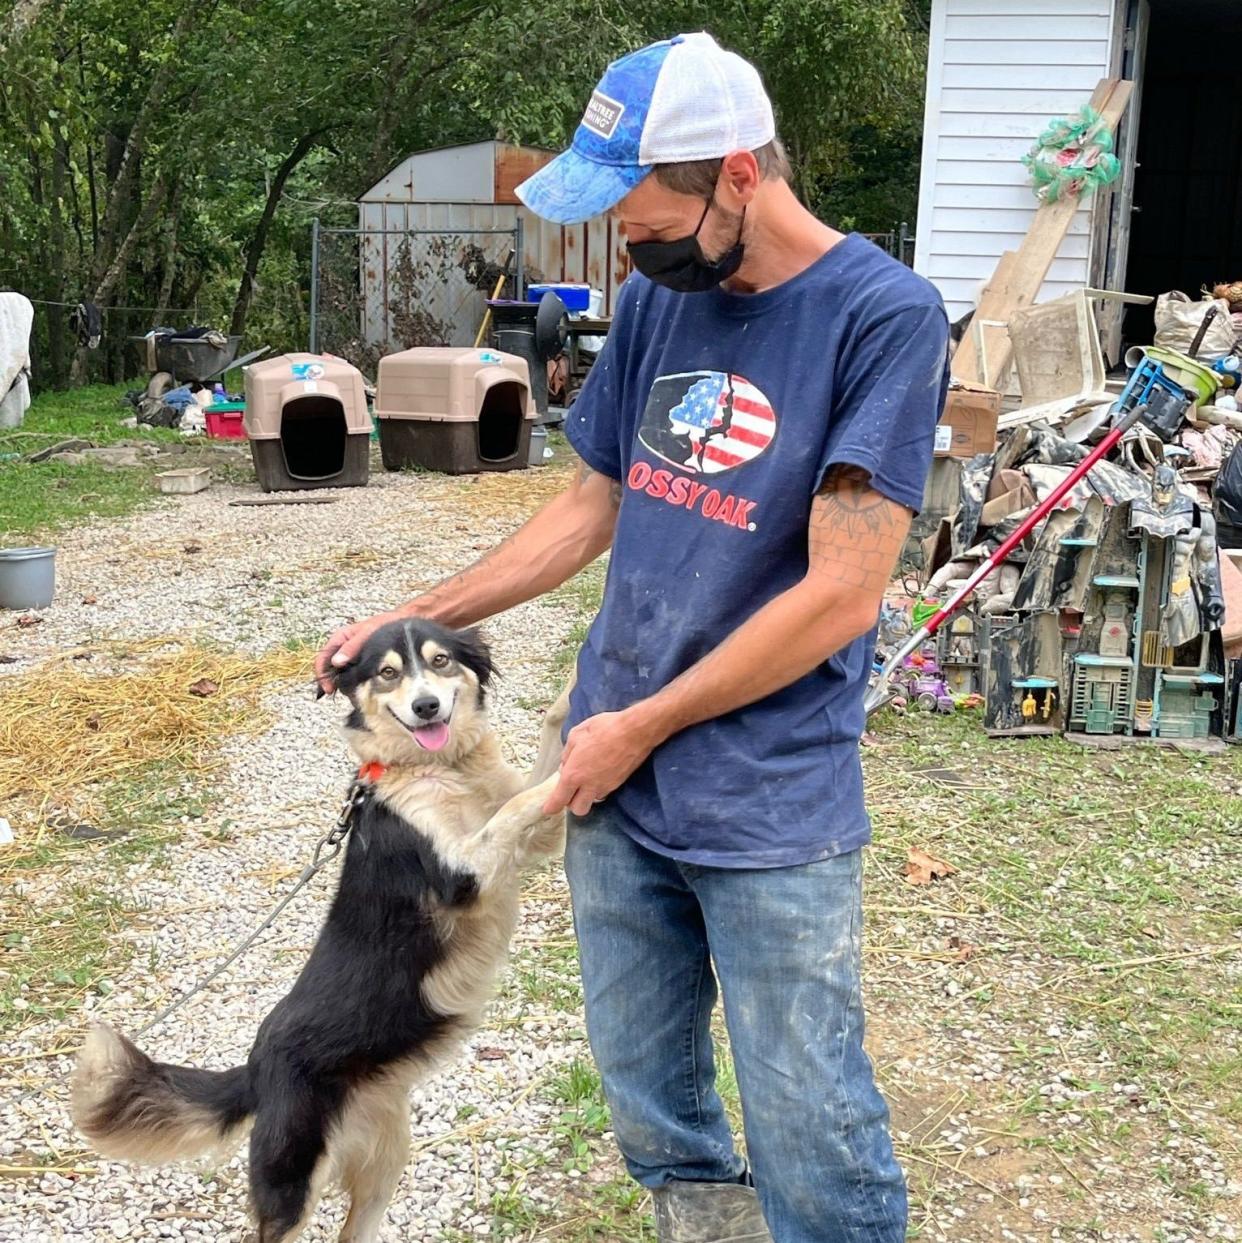 Kentucky resident Greg Stivers plays with one of his dogs outside of his flood-damaged home. American Humane helped Stivers and his family care for their pets in the aftermath of catastrophic floods that affected eastern Kentucky last month.